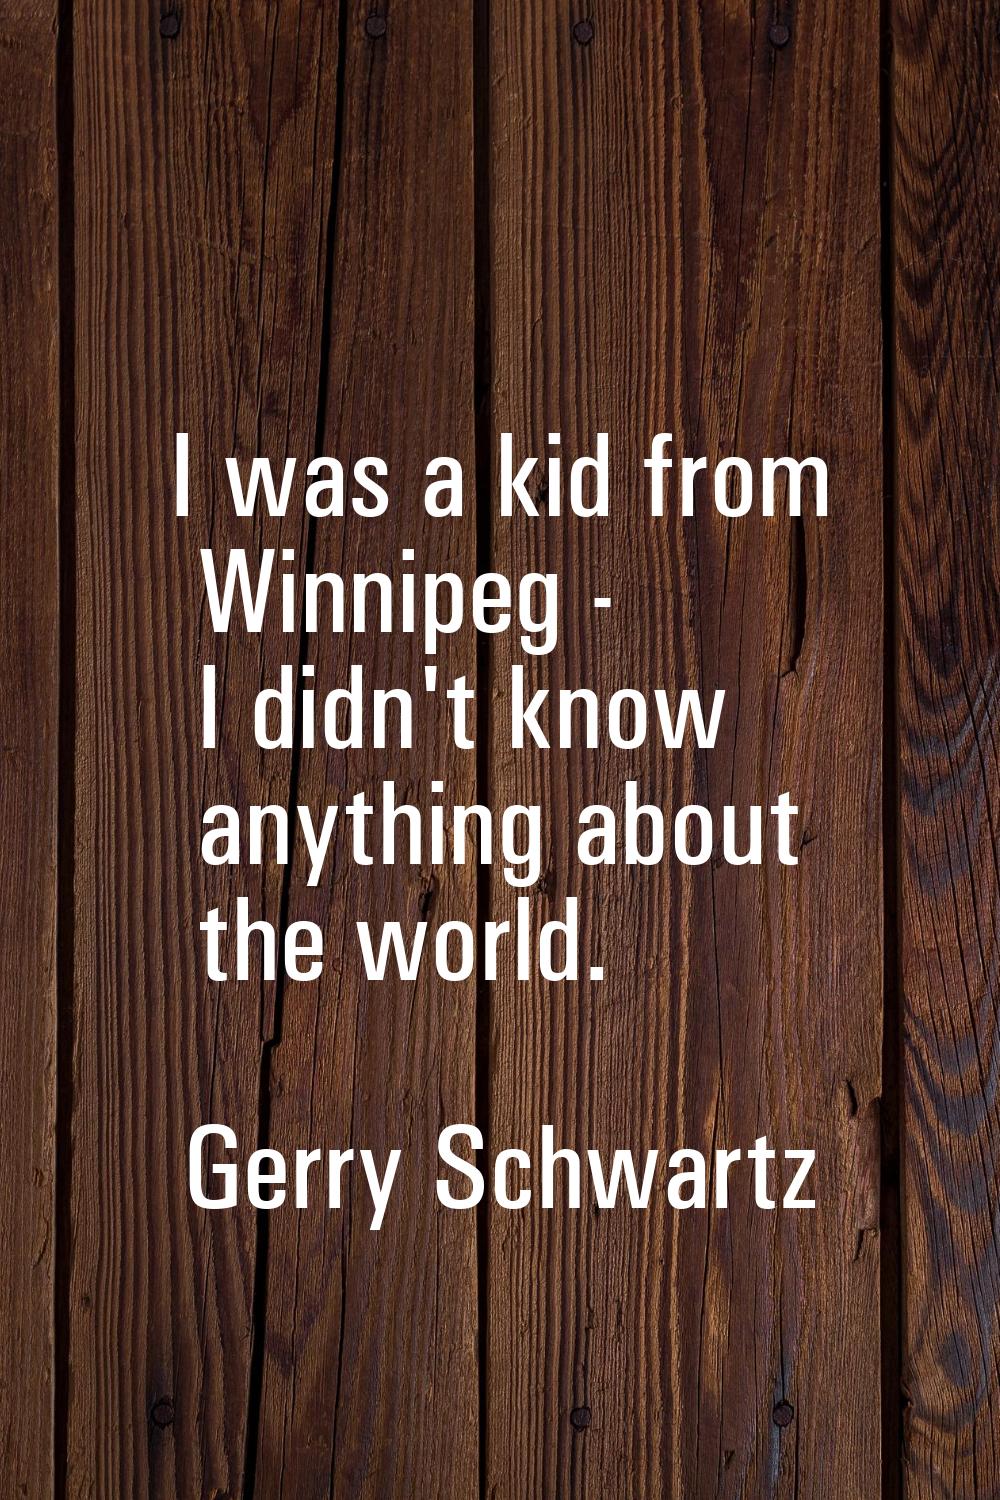 I was a kid from Winnipeg - I didn't know anything about the world.